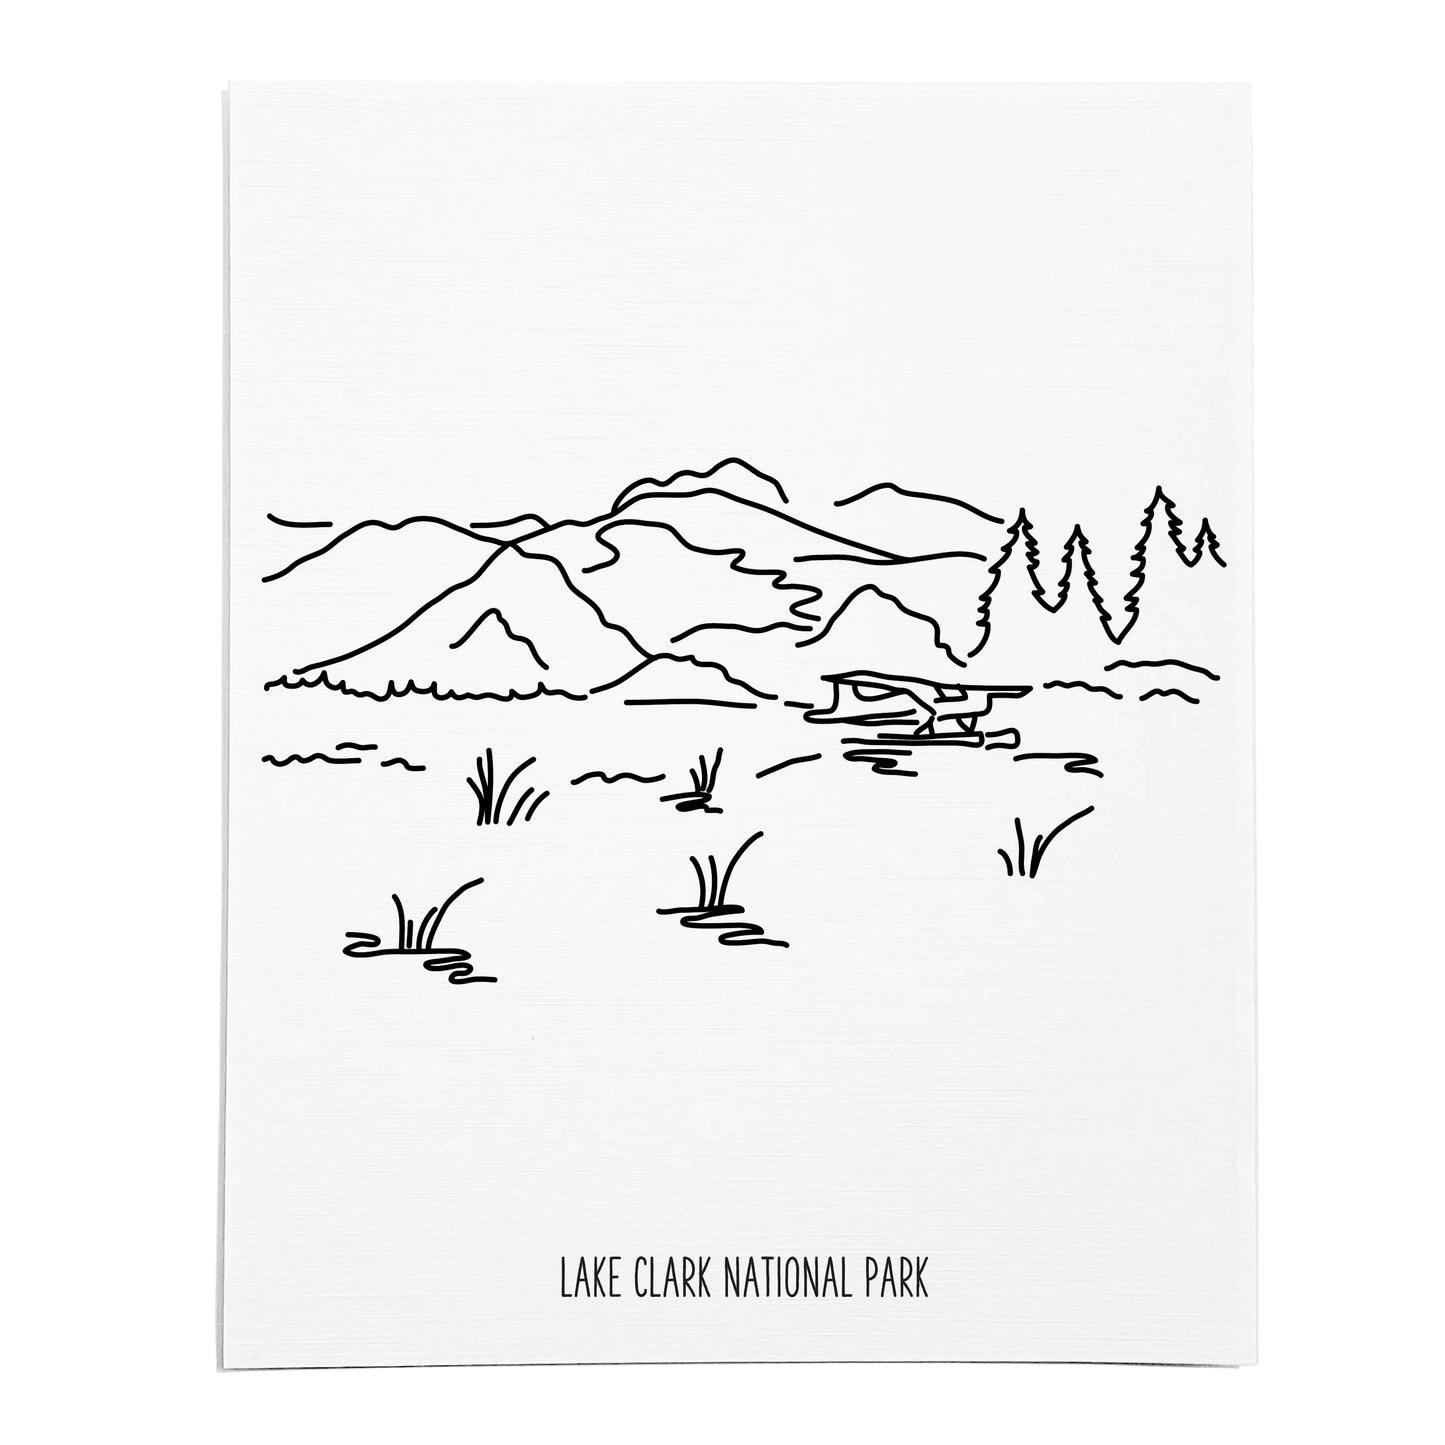 An art print featuring a line drawing of Lake Clark National Park on white linen paper